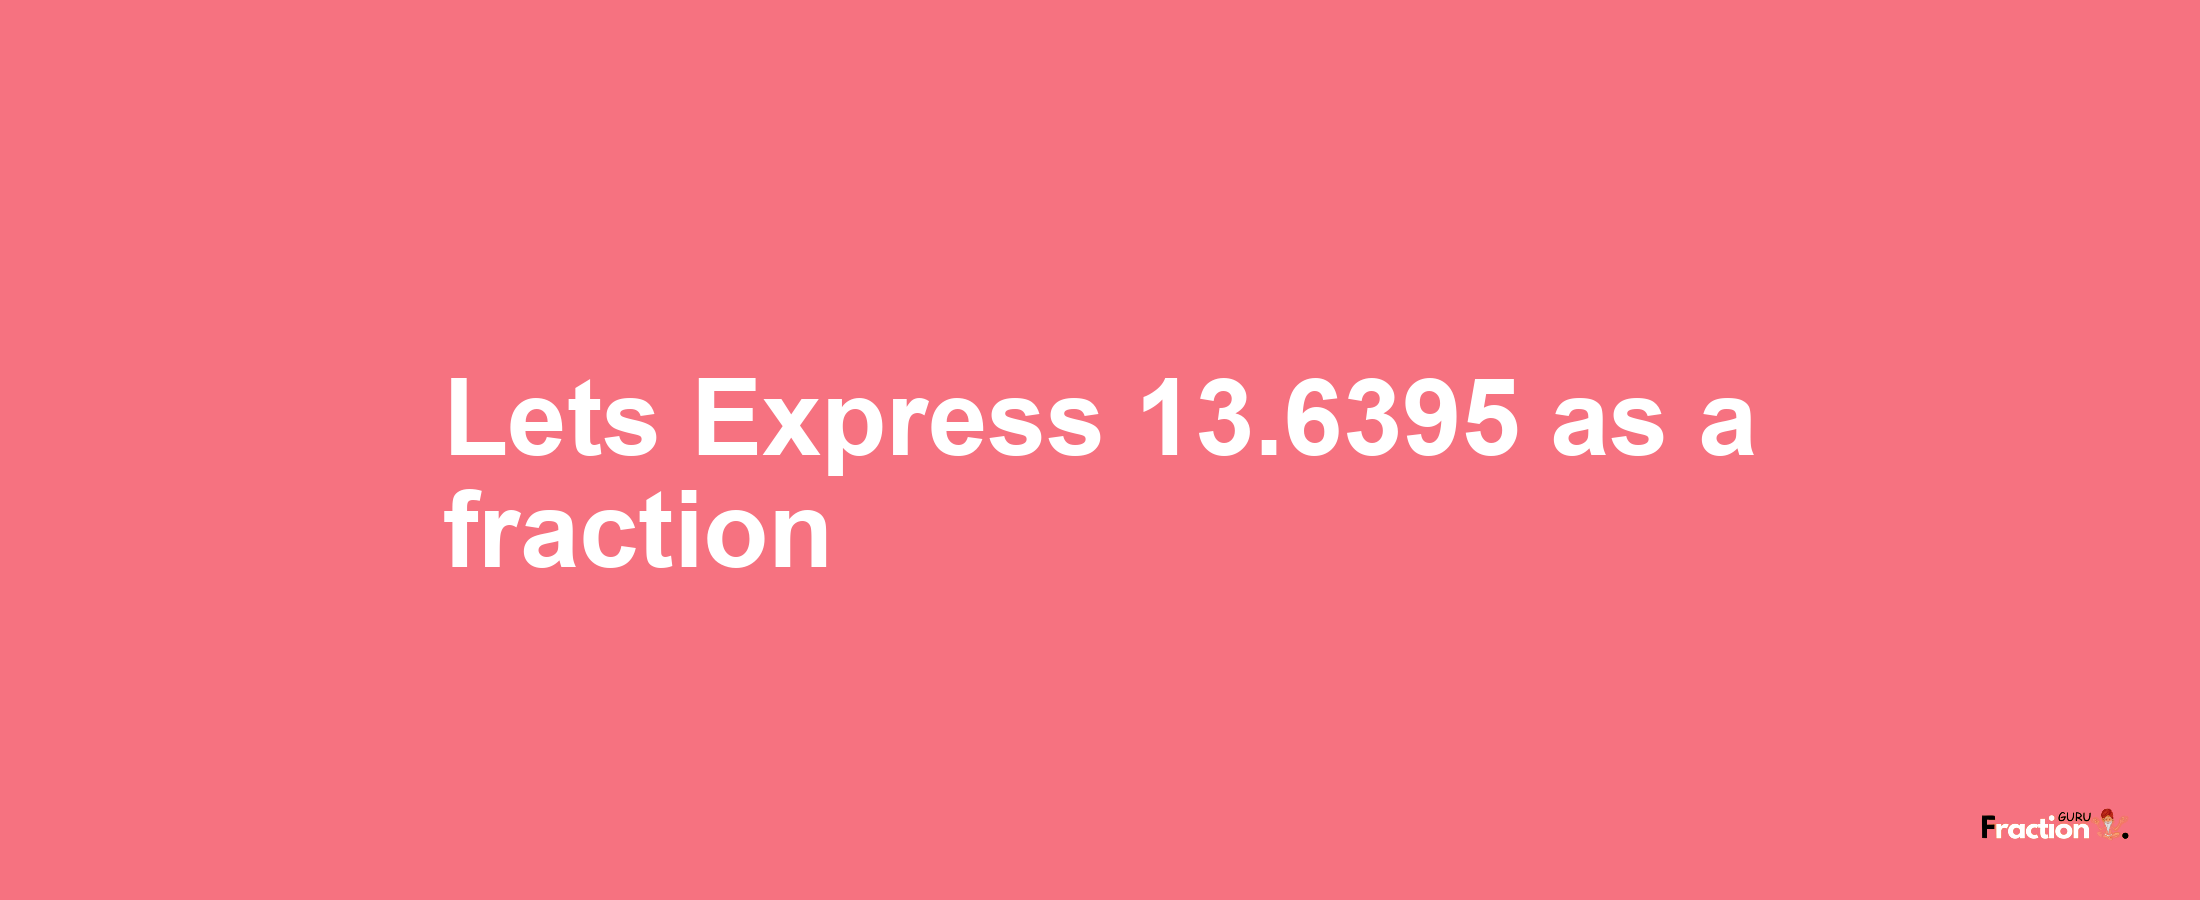 Lets Express 13.6395 as afraction